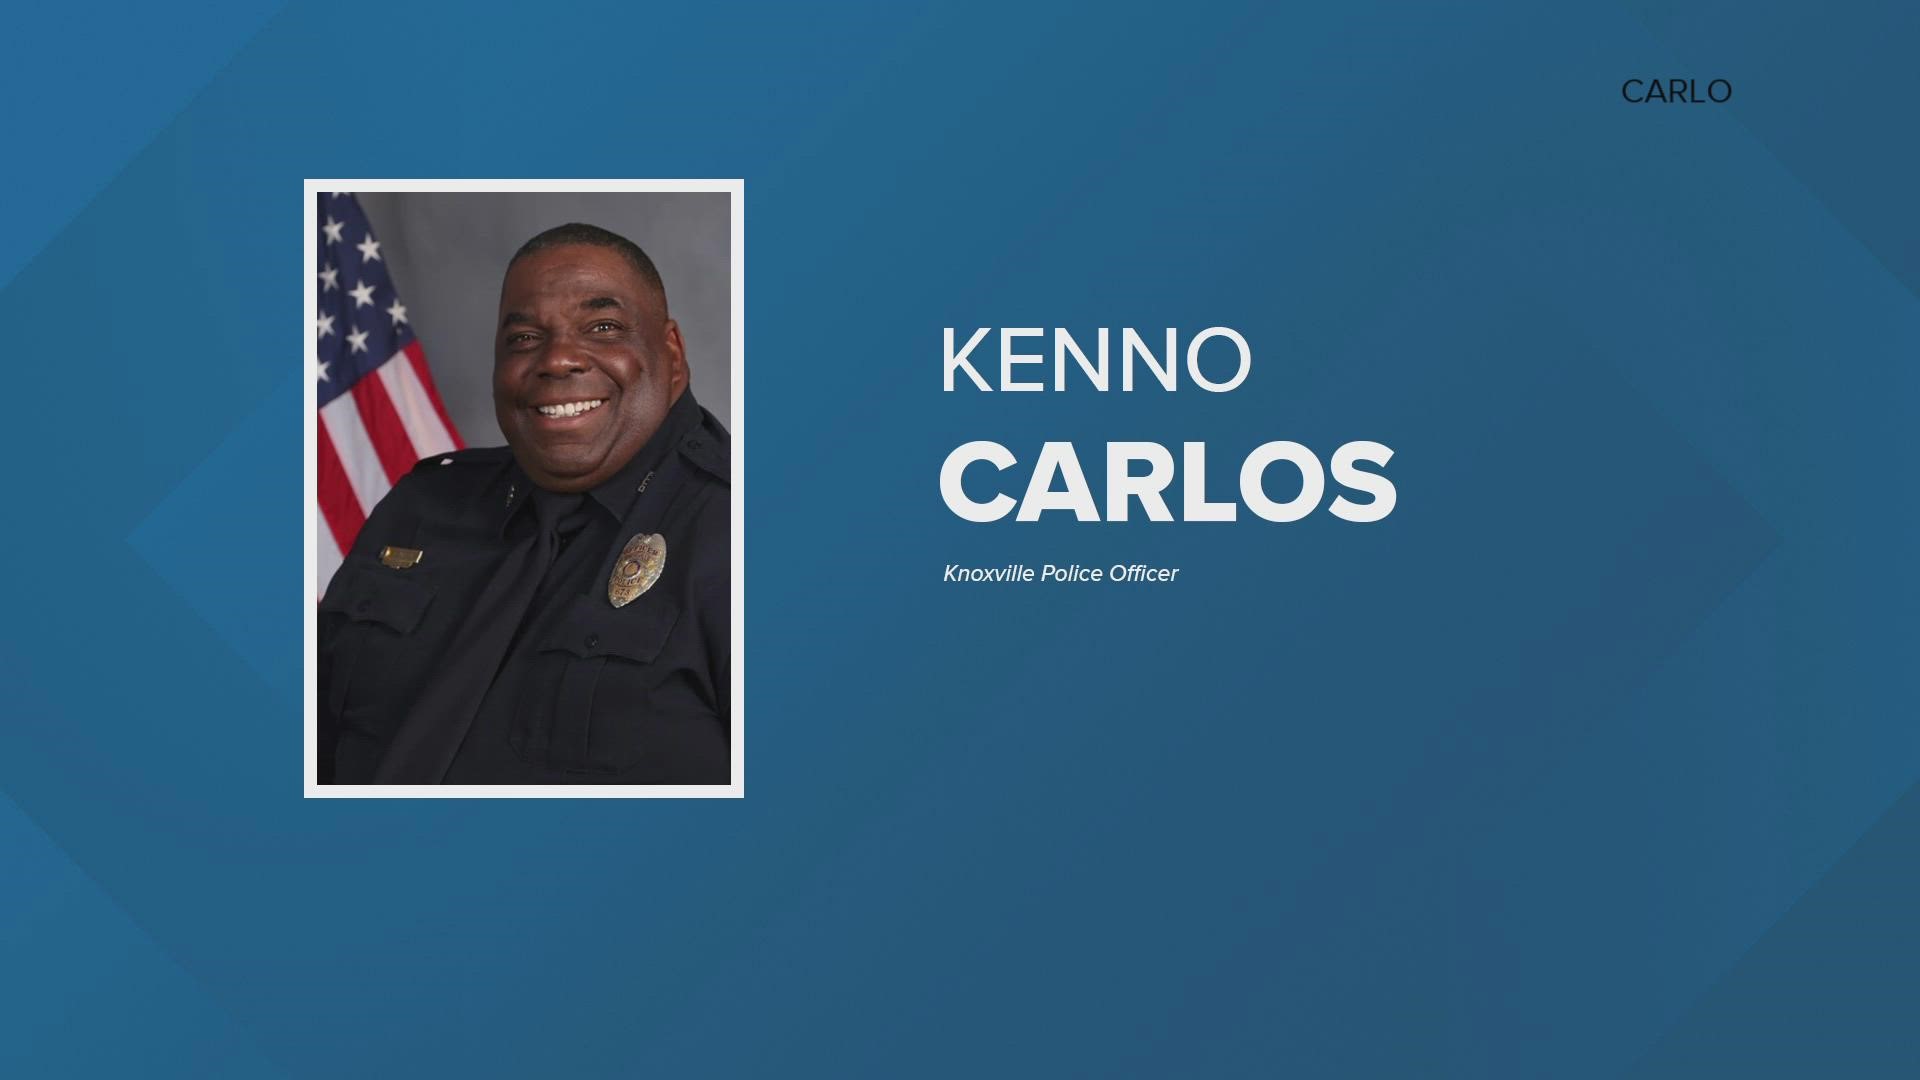 Kenno Carlos' personnel file revealed 15 reprimands after 29 years. He was accused of stealing items in January from a police cadet's locker.